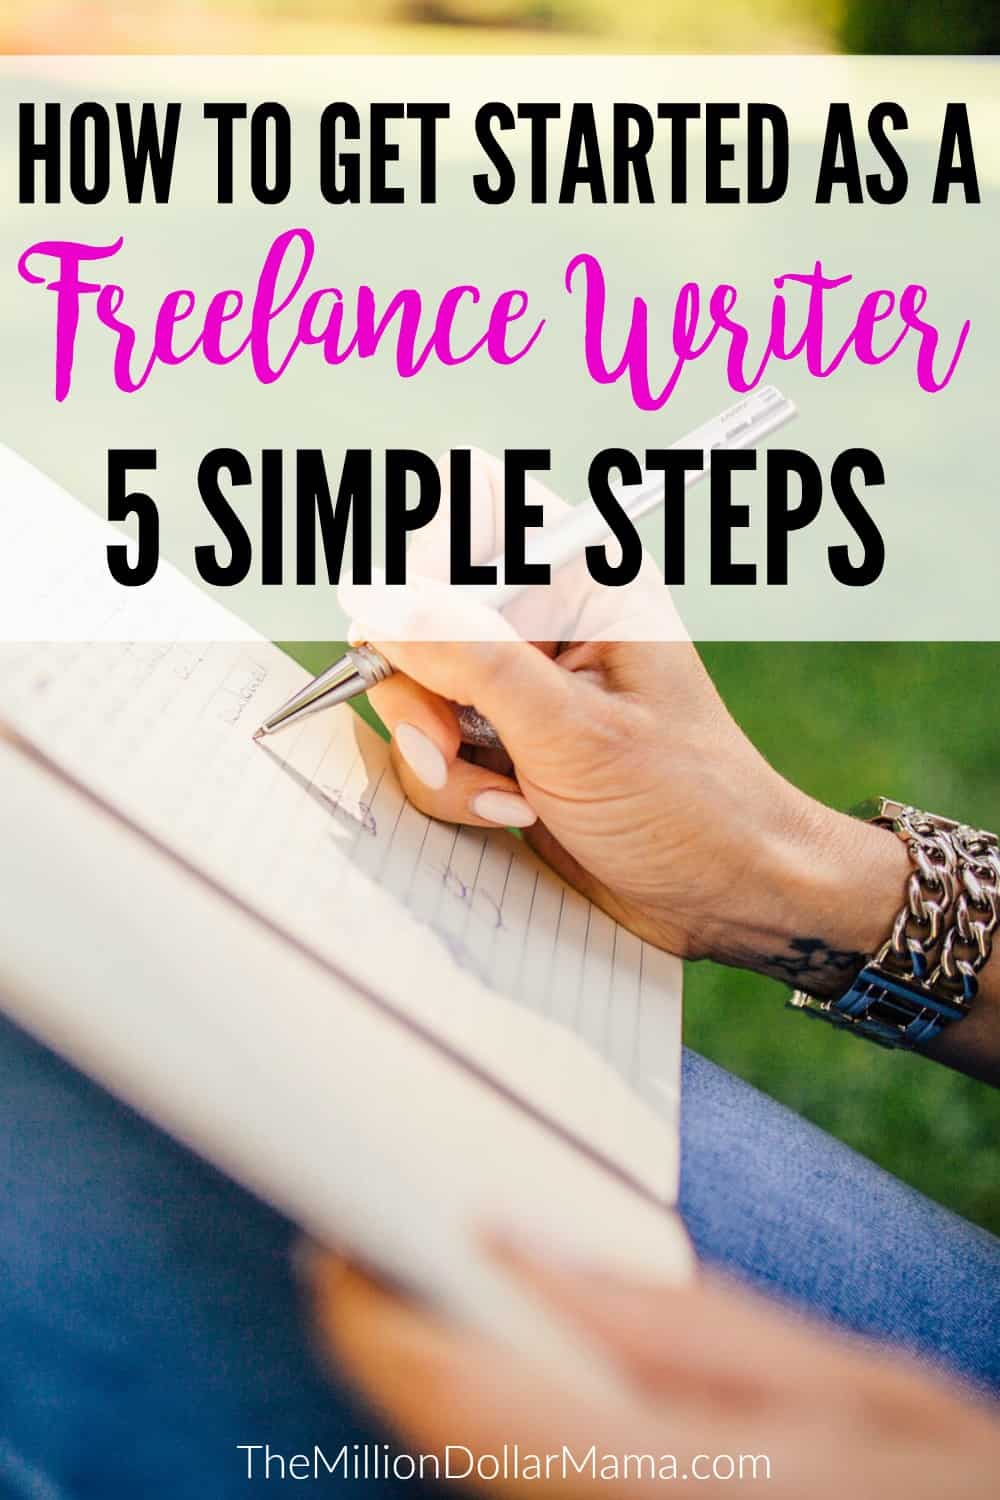 How to become a freelance writer - 5 easy steps to help you get started making money from home as a freelance writer!